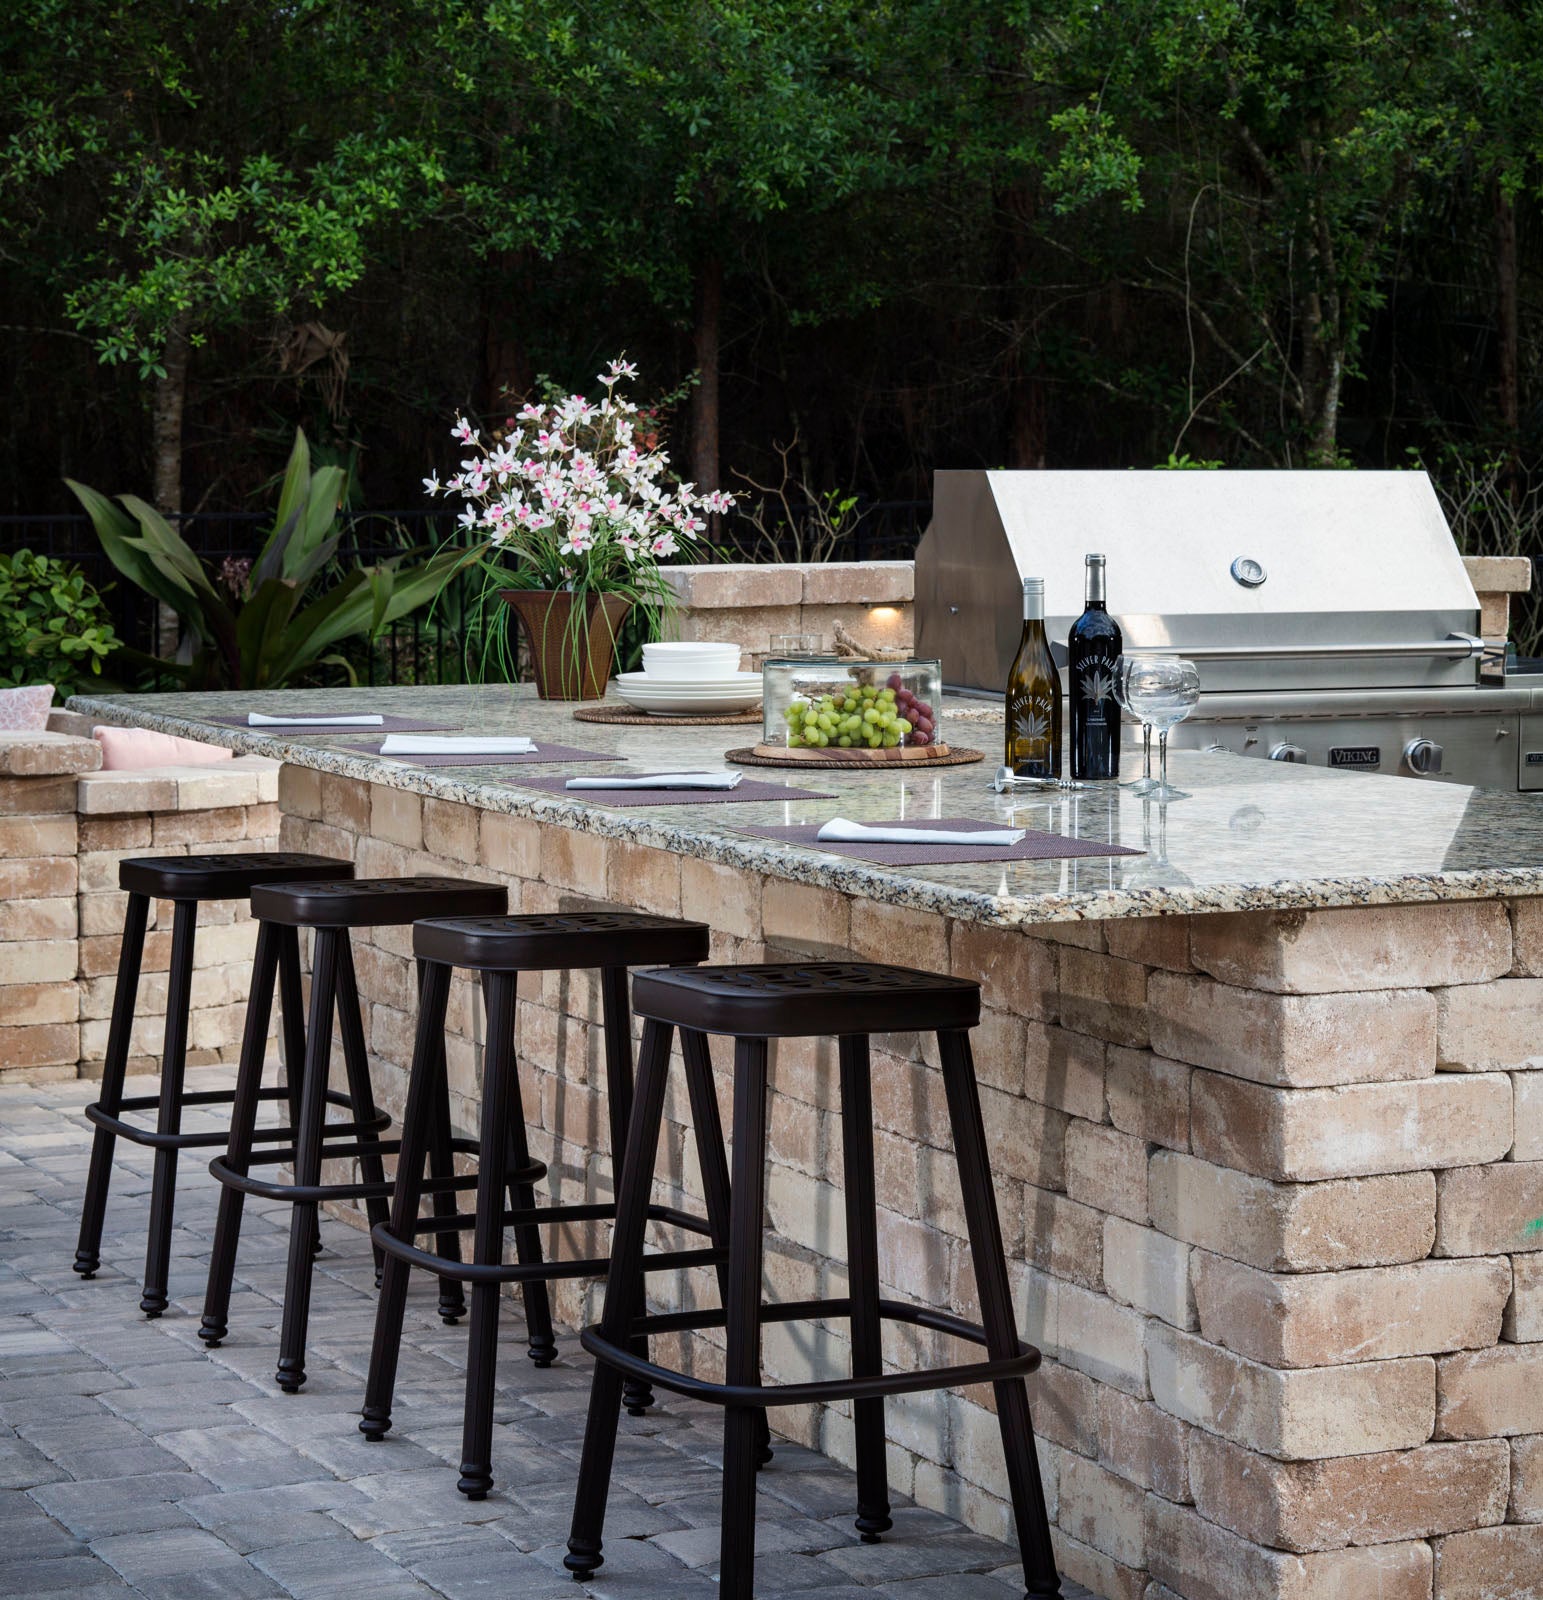 Weston Wall outdoor kitchen with bartop dining